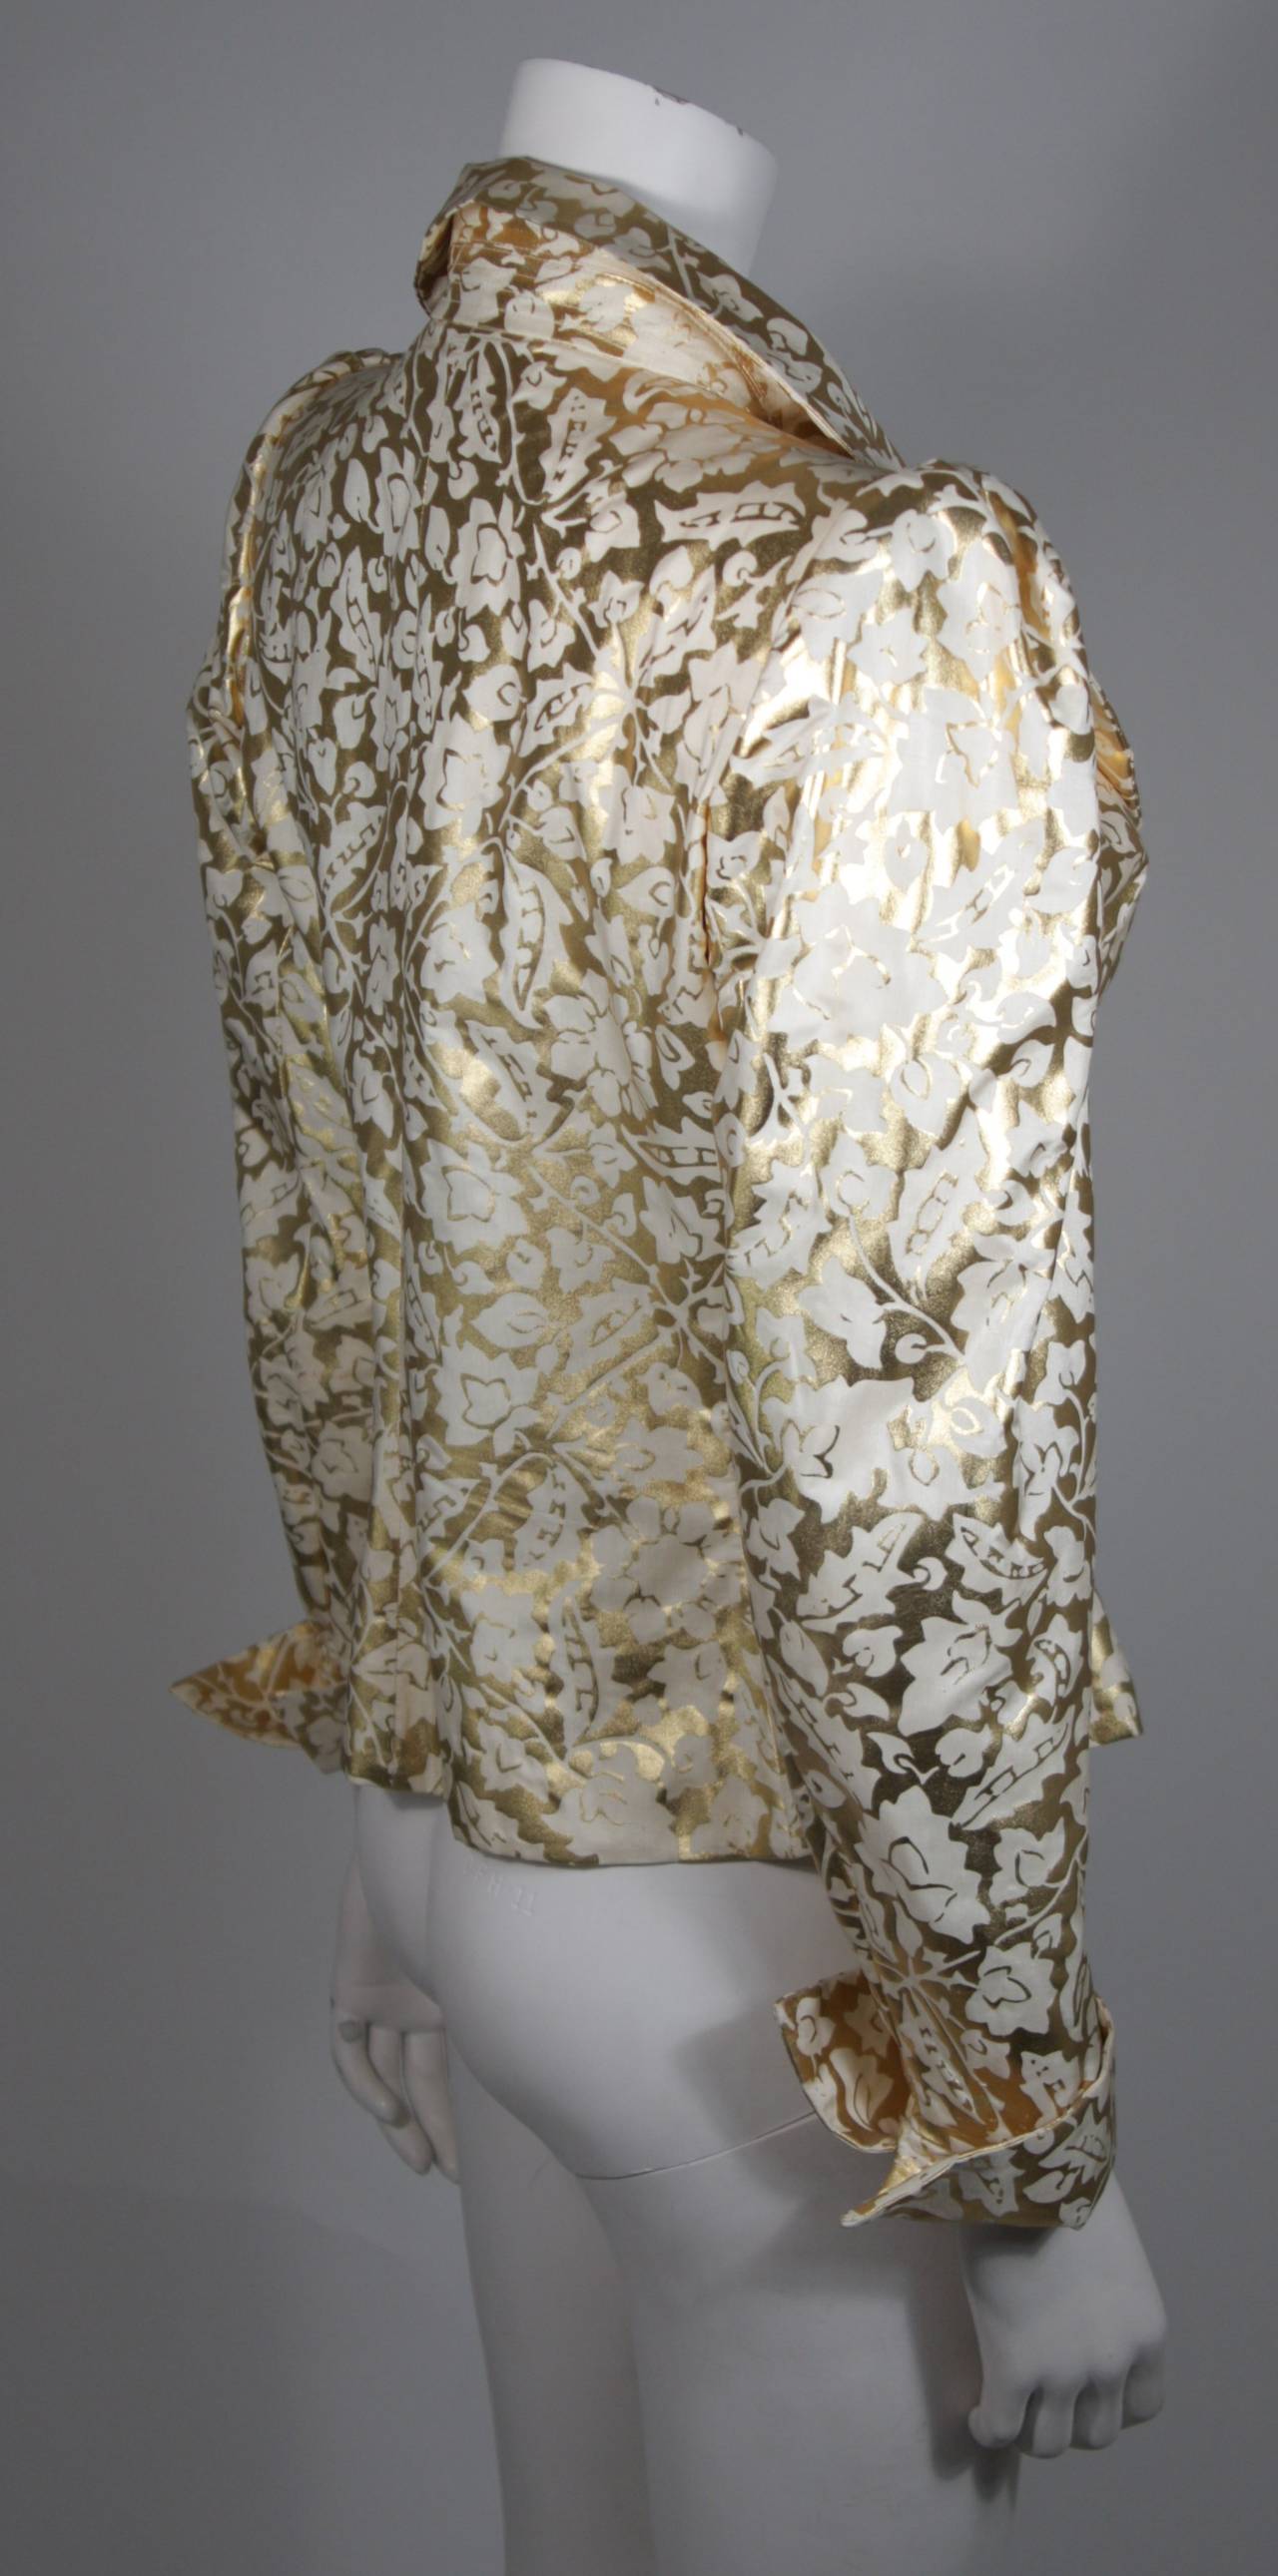 Yves Saint Laurent Gold Foil Jacket with Enamel Daisy Buttons Size 40 In Excellent Condition For Sale In Los Angeles, CA